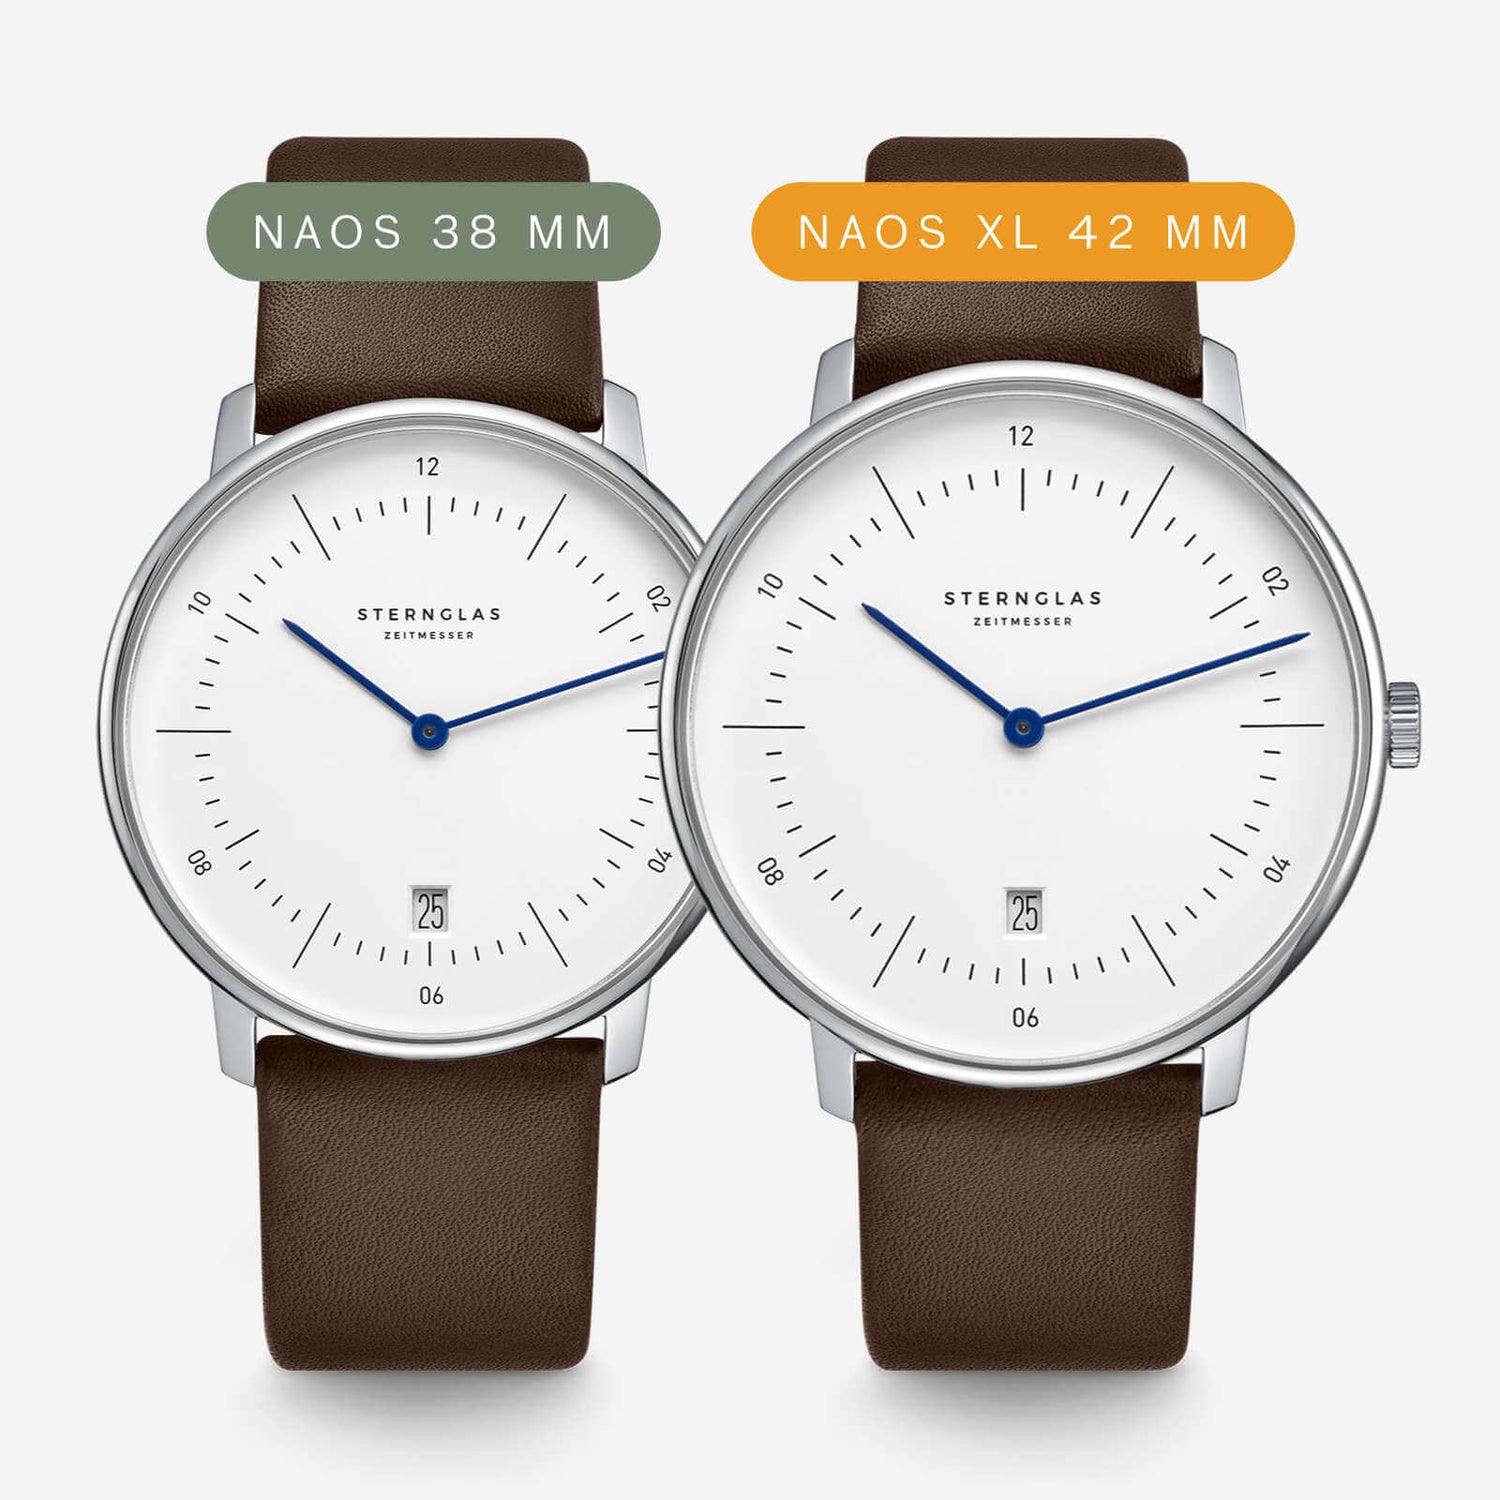 popup|For wider wrists|The Naos XL grows by 4 mm in diameter compared to the original size.